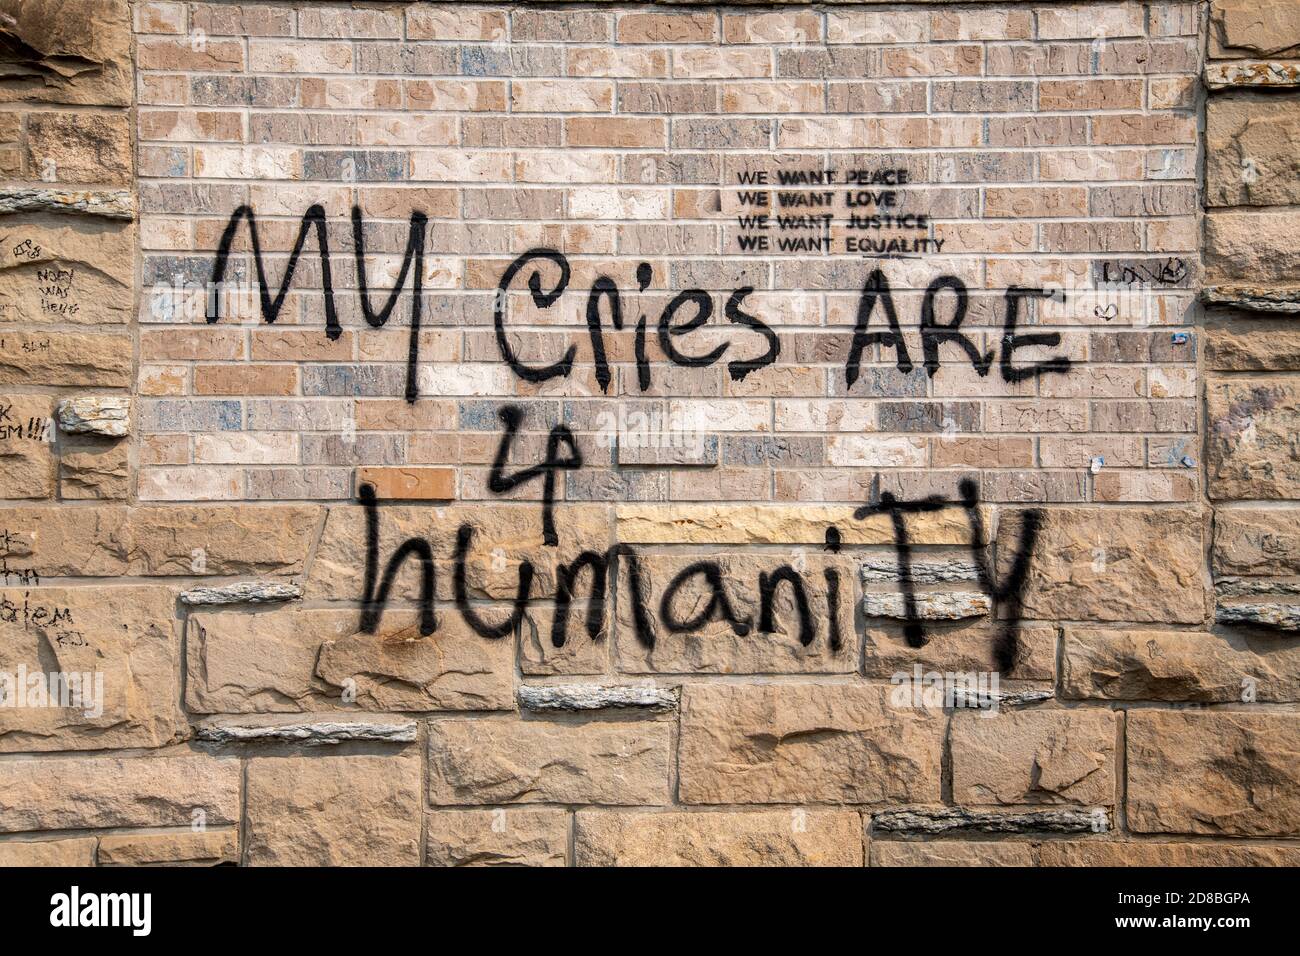 Minneapolis, MN.  Graffiti on brick wall at George Floyd memorial site.  Cries for humanity. Stock Photo